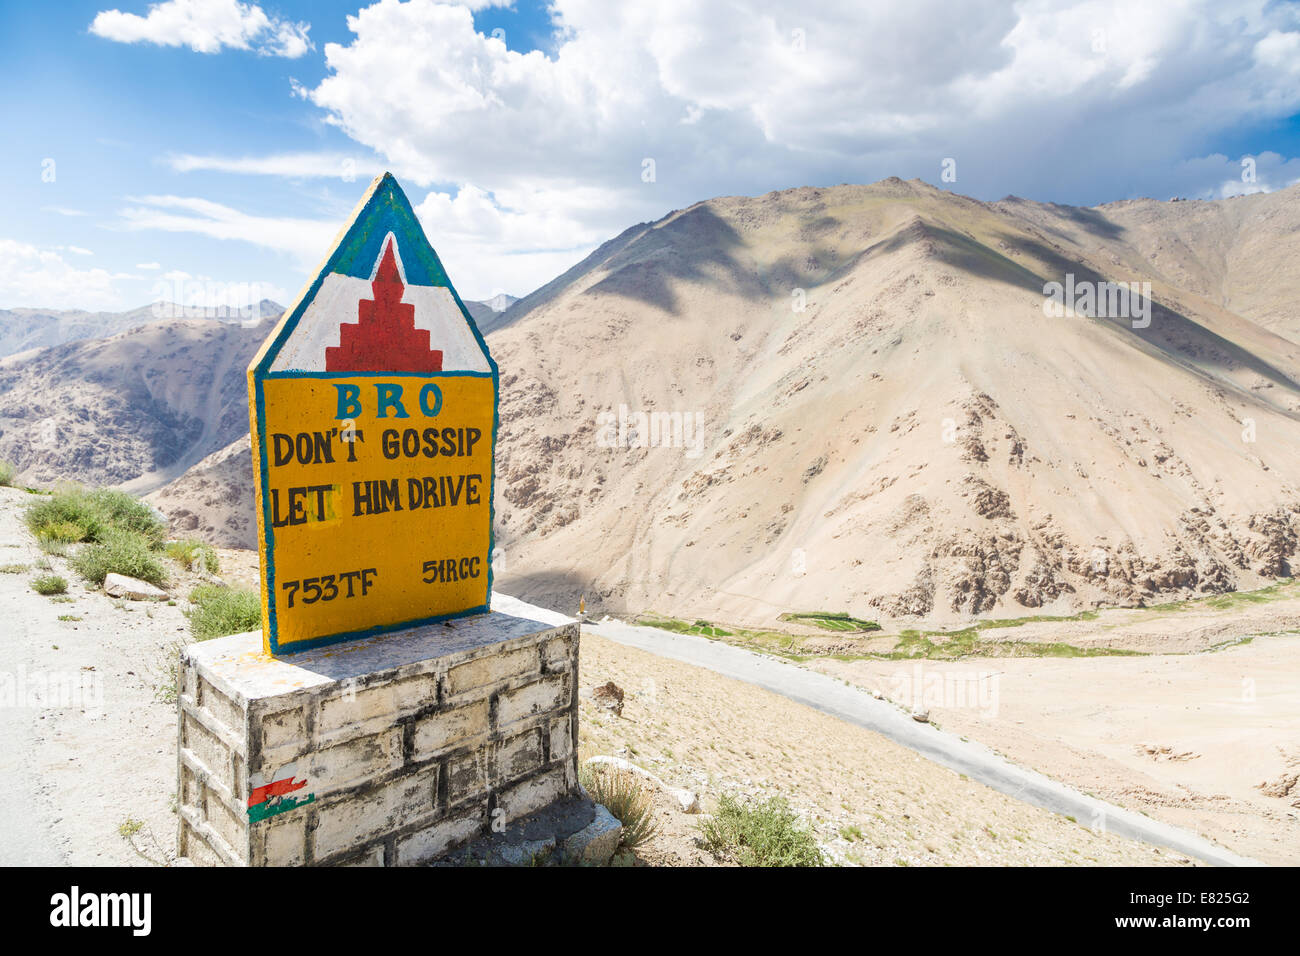 'Don't gossip, let him drive' sign on the road in Ladakh, India Stock Photo